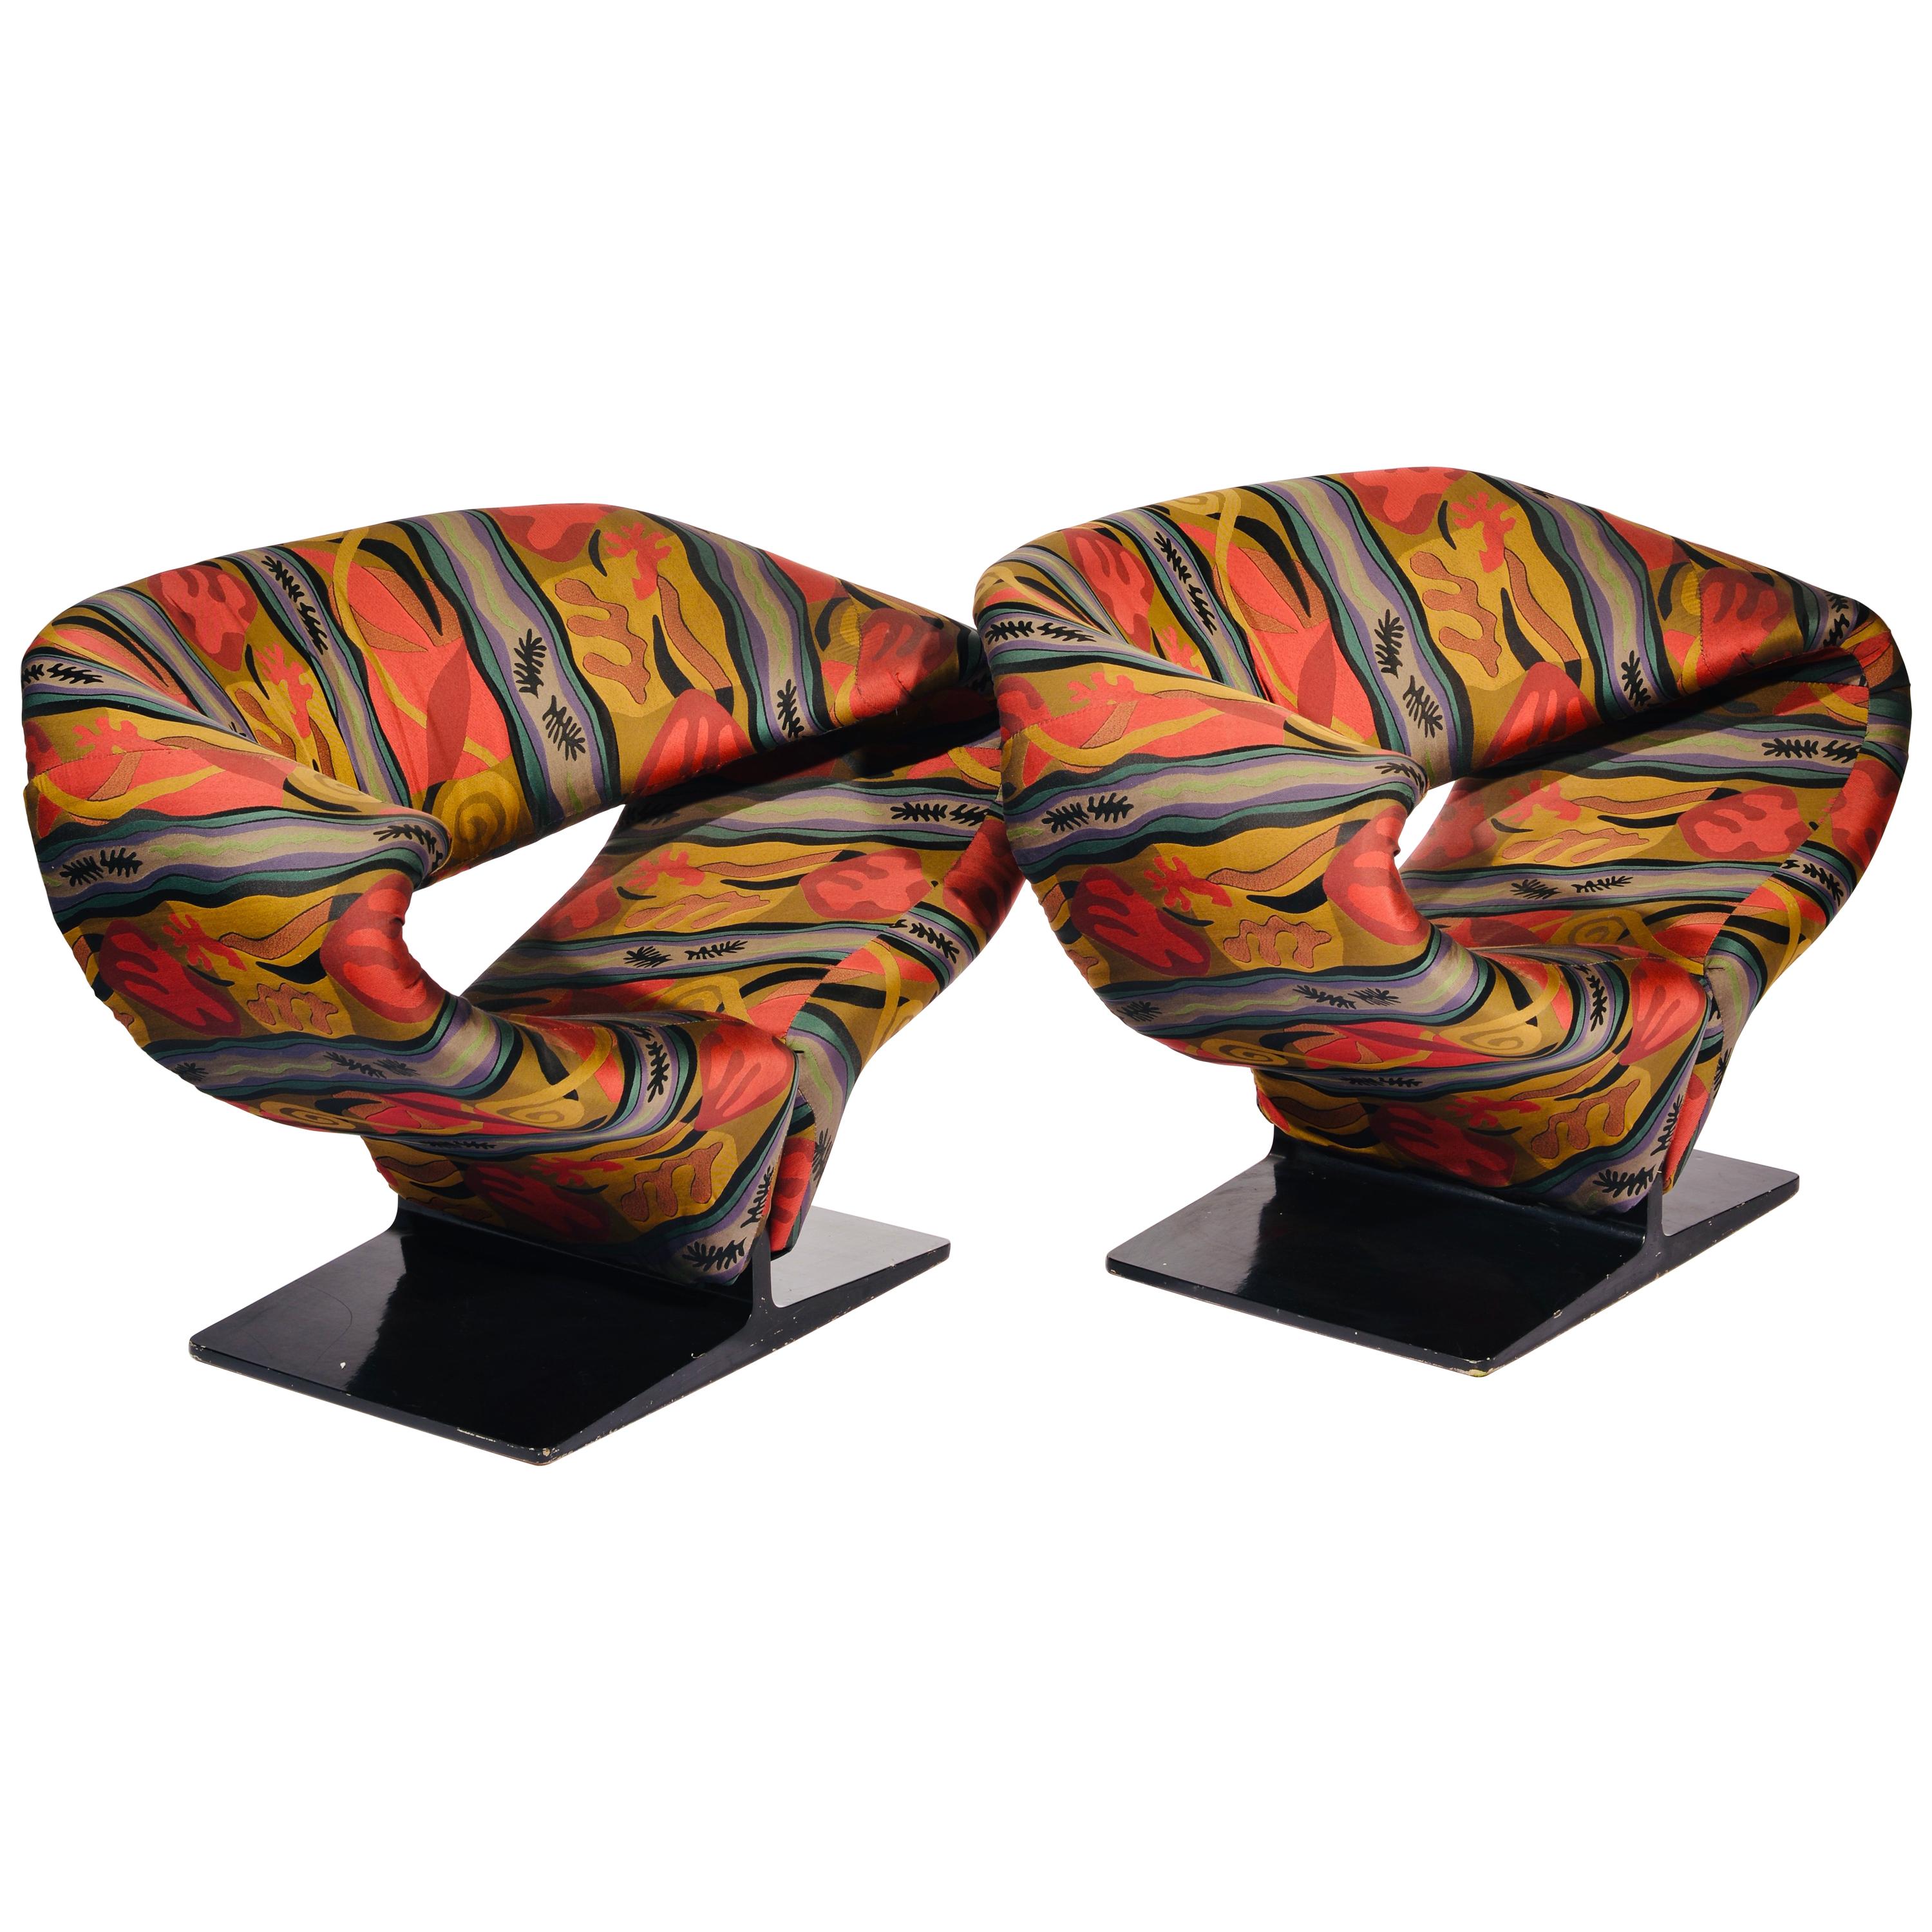 Ribbon Lounge Chair And Ottoman